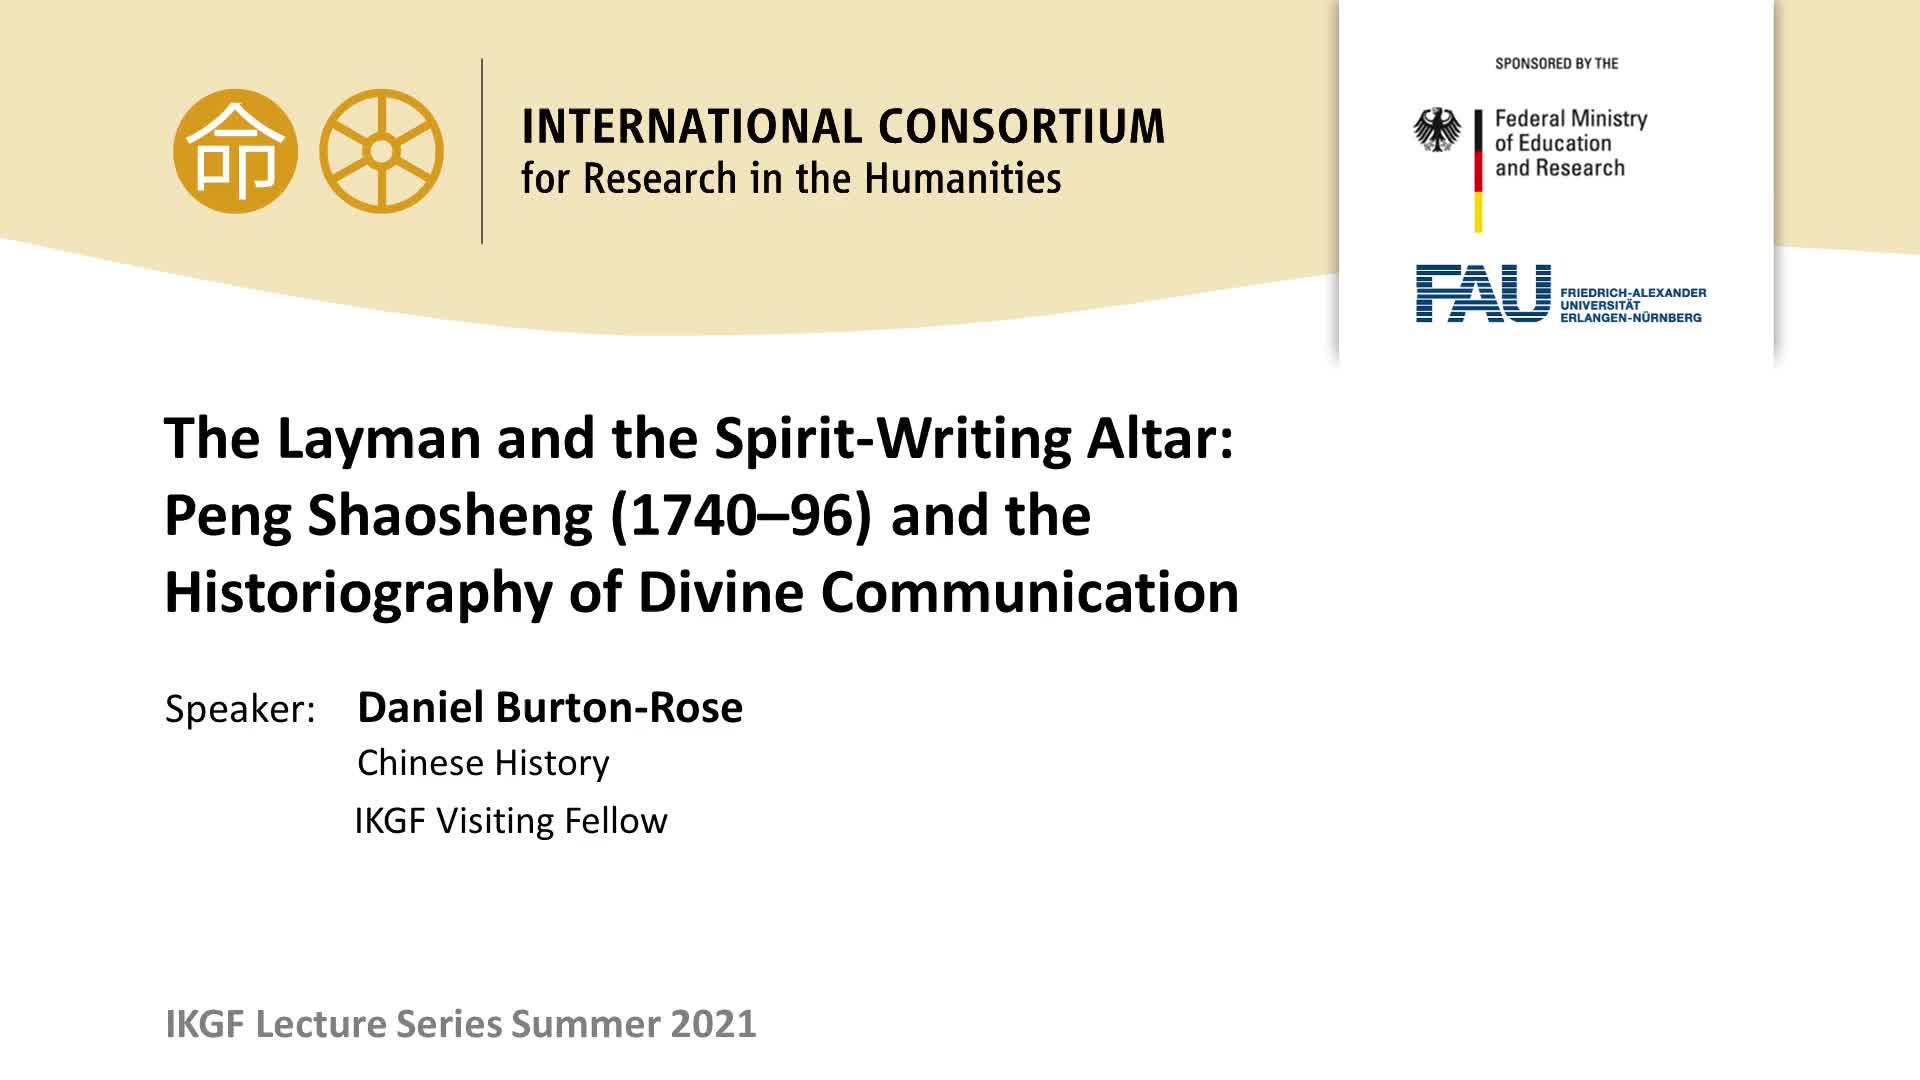 The Layman and the Spirit-Writing Altar: Peng Shaosheng (1740–96) and the Historiography of Divine Communication preview image